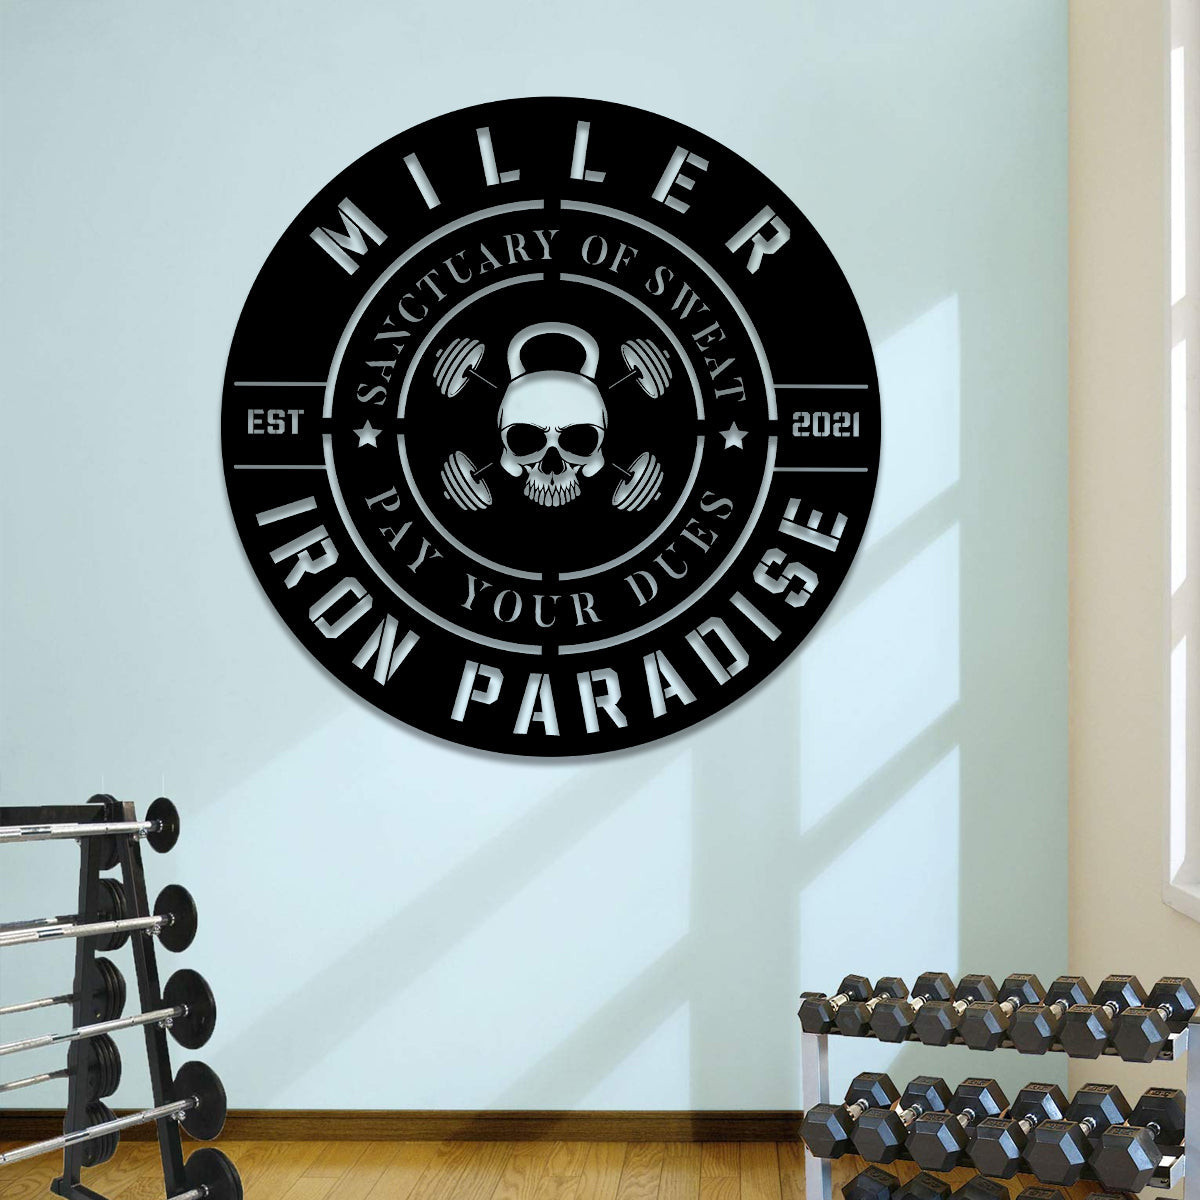 Personalized Skull Metal Gym Sign, Fitness, Cross Fit Club, Wall Decor, Metal Laser Cut Metal Signs Custom Gift Ideas 18x18IN